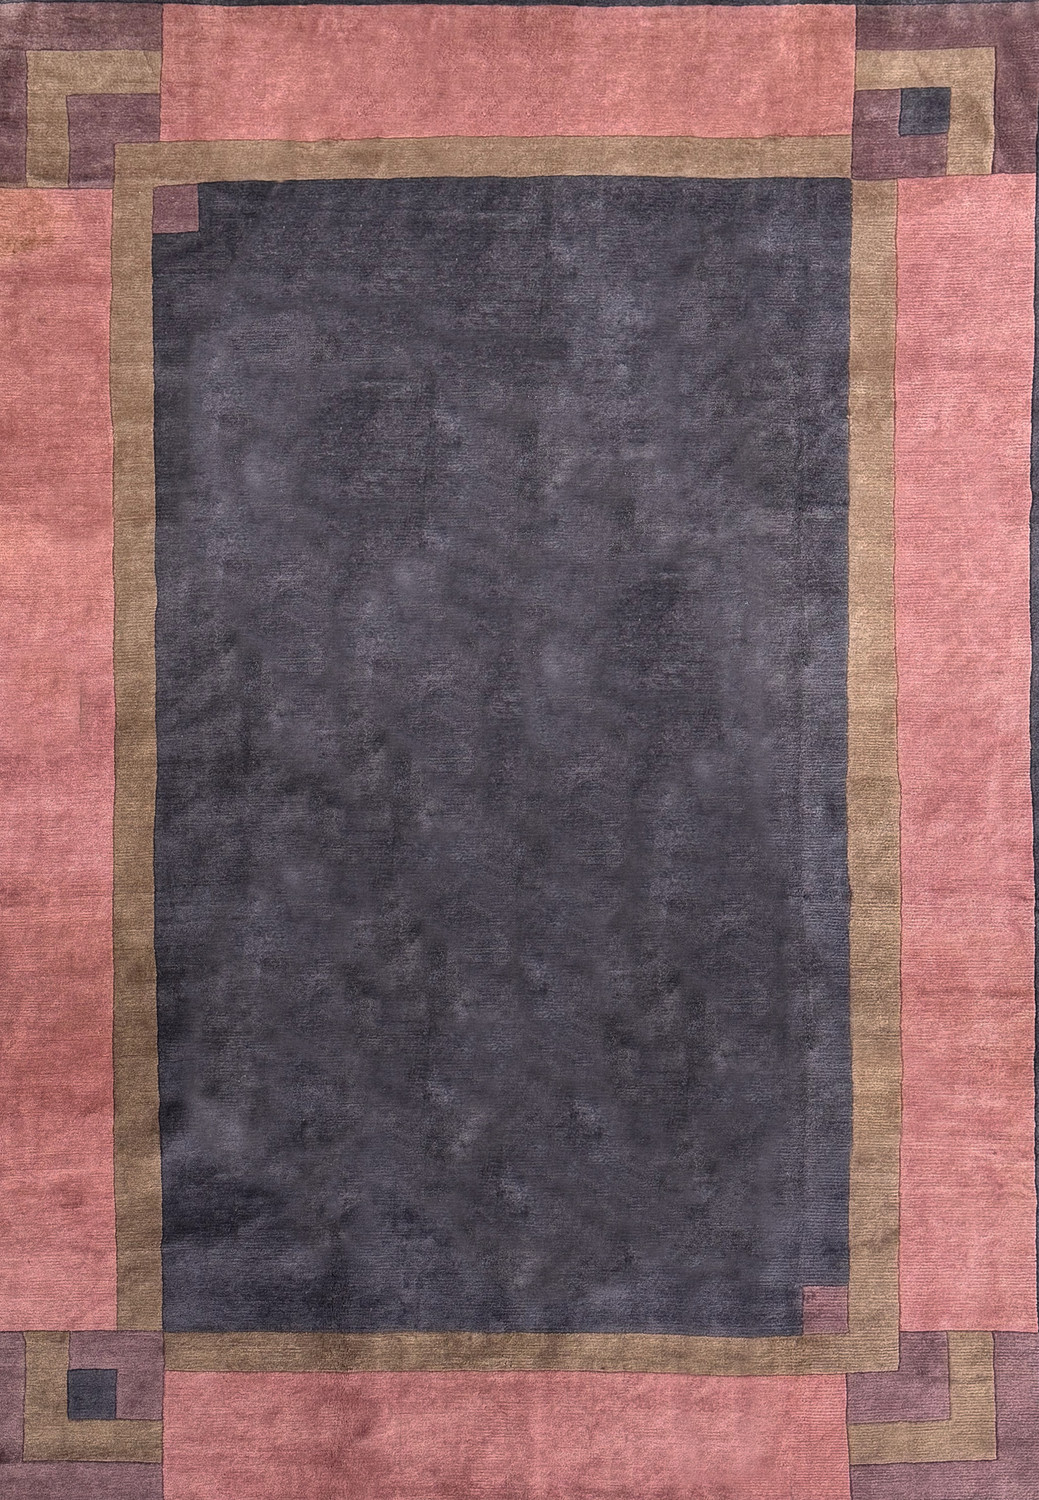 Close-up of the Modern Tibet Rug showcasing the interplay of grey and rose hues